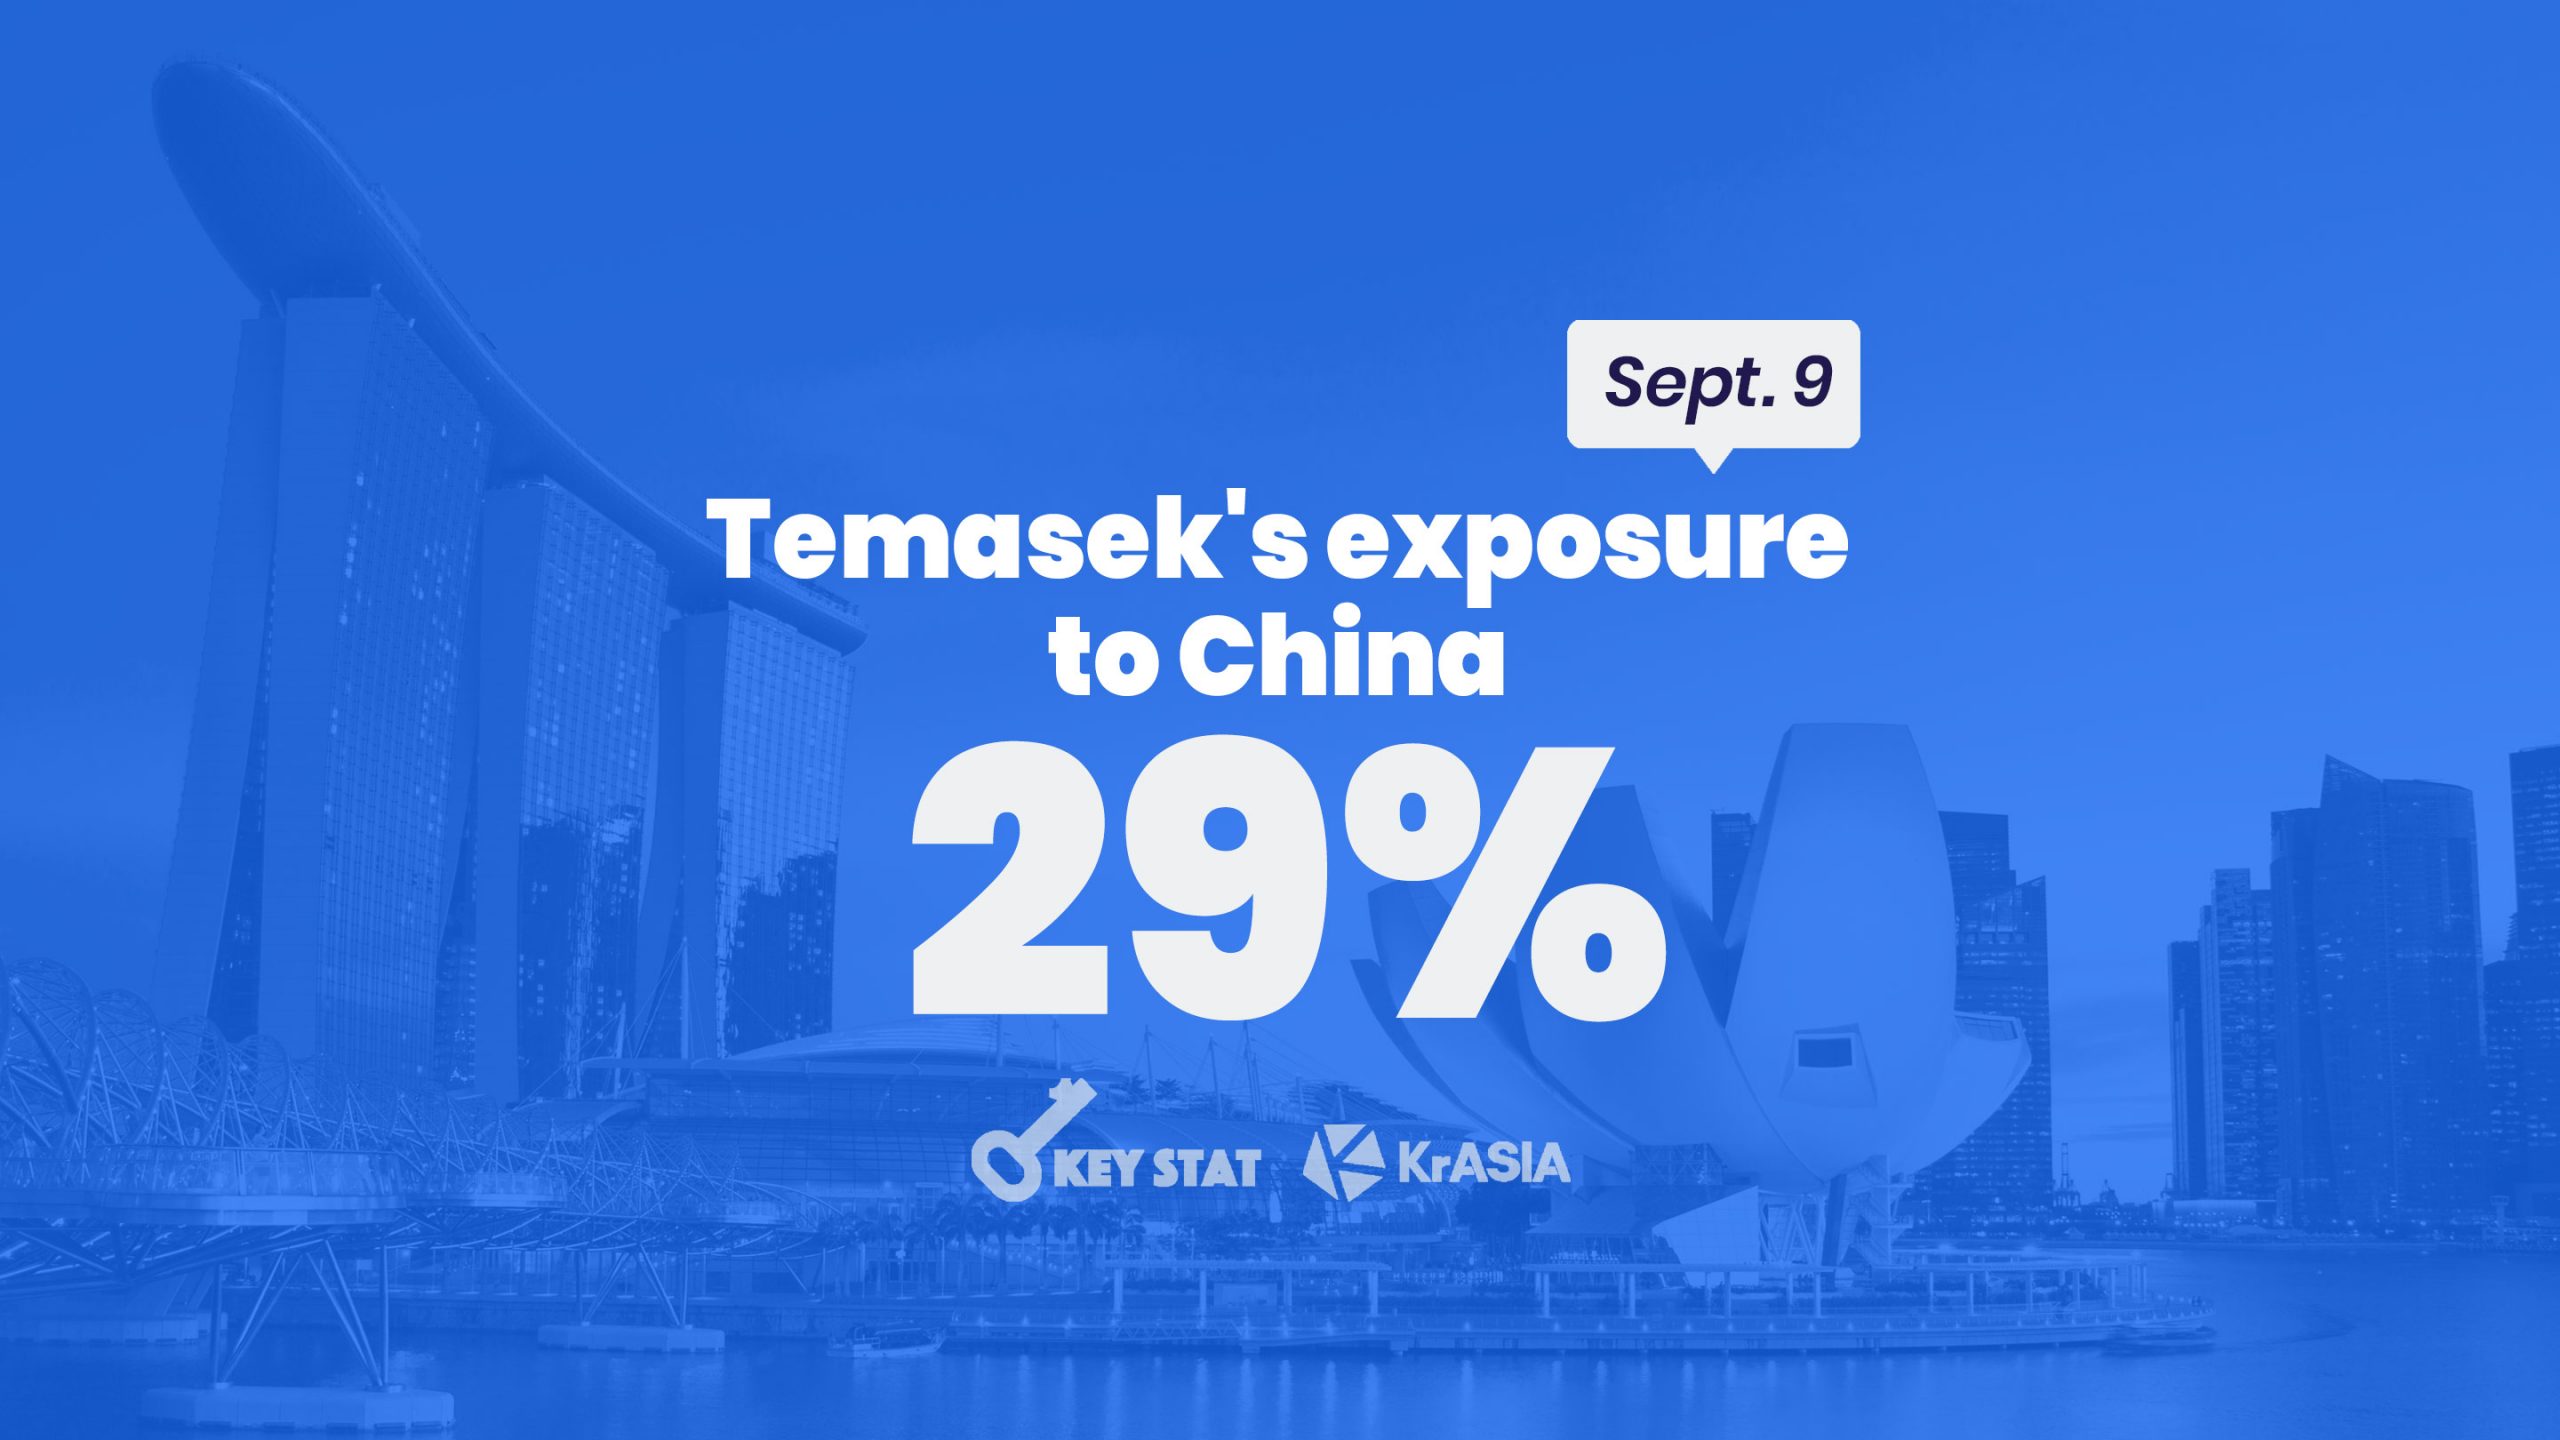 KEY STAT | Temasek’s assets in China exceed Singapore for first time